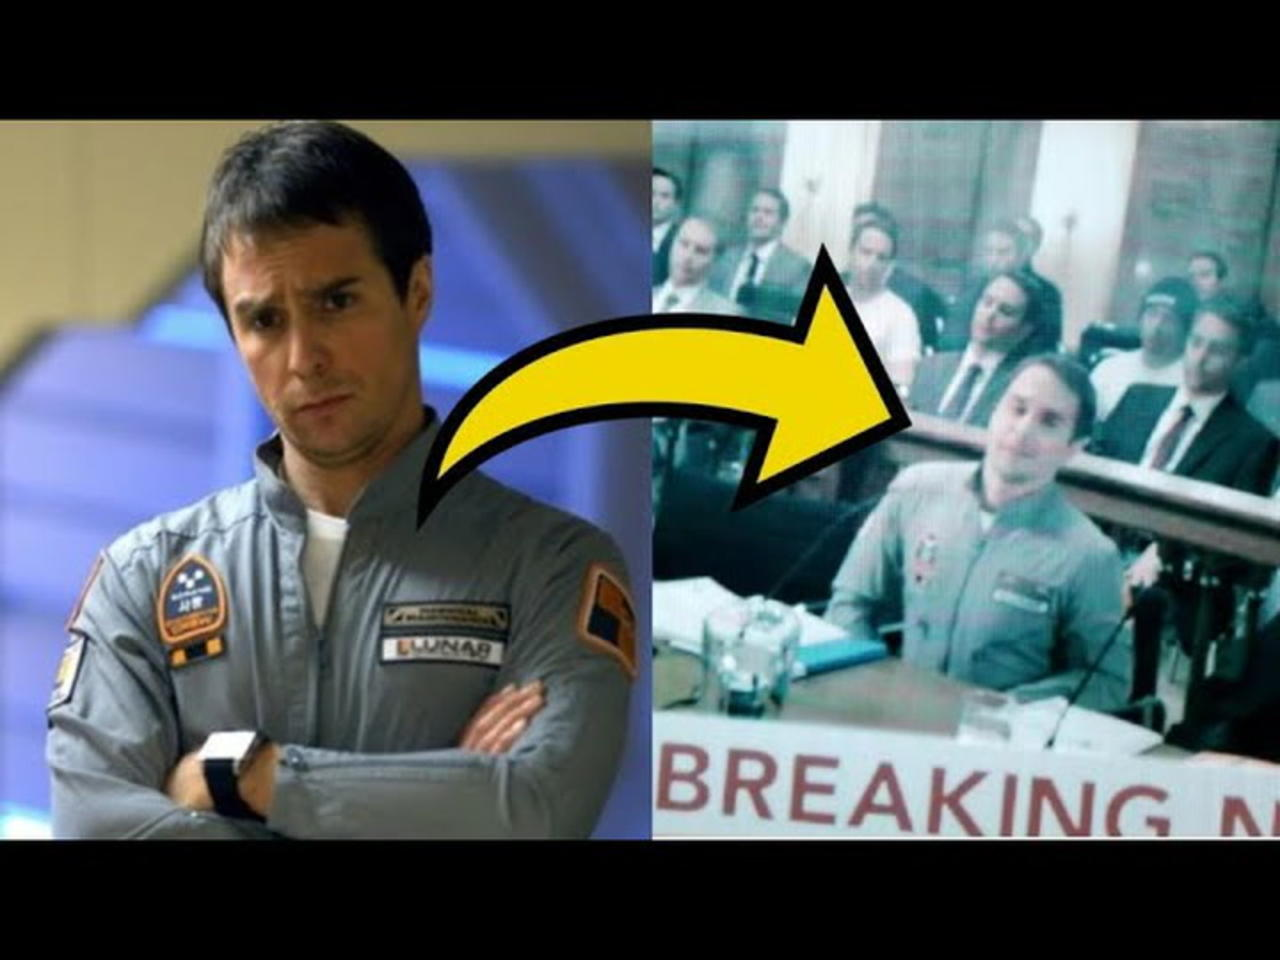 10 More Actors You Didn't Know Played The Same Character in Different Movies